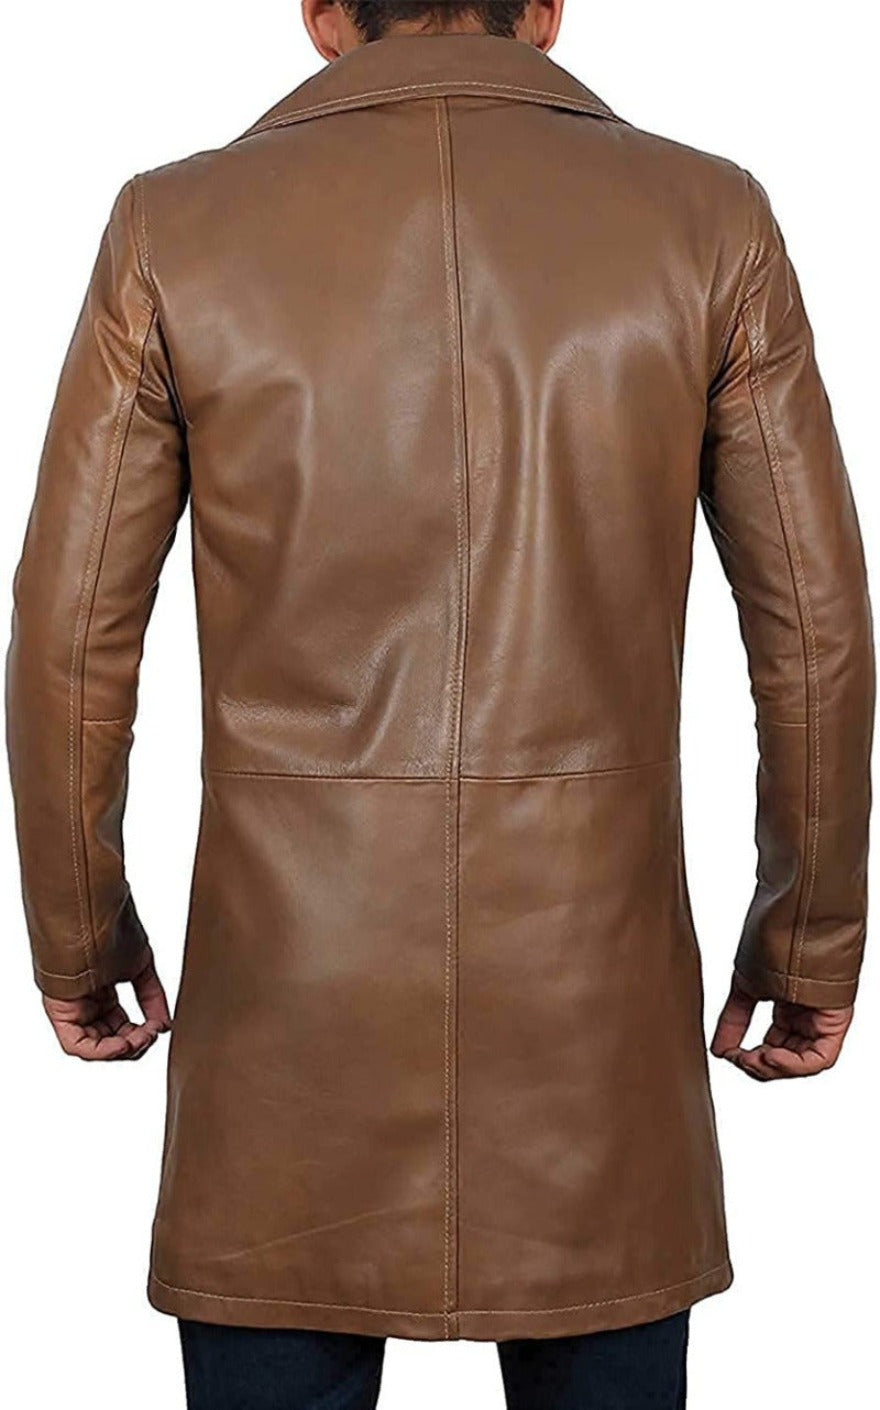 Mens long leather trench coat brown, back view